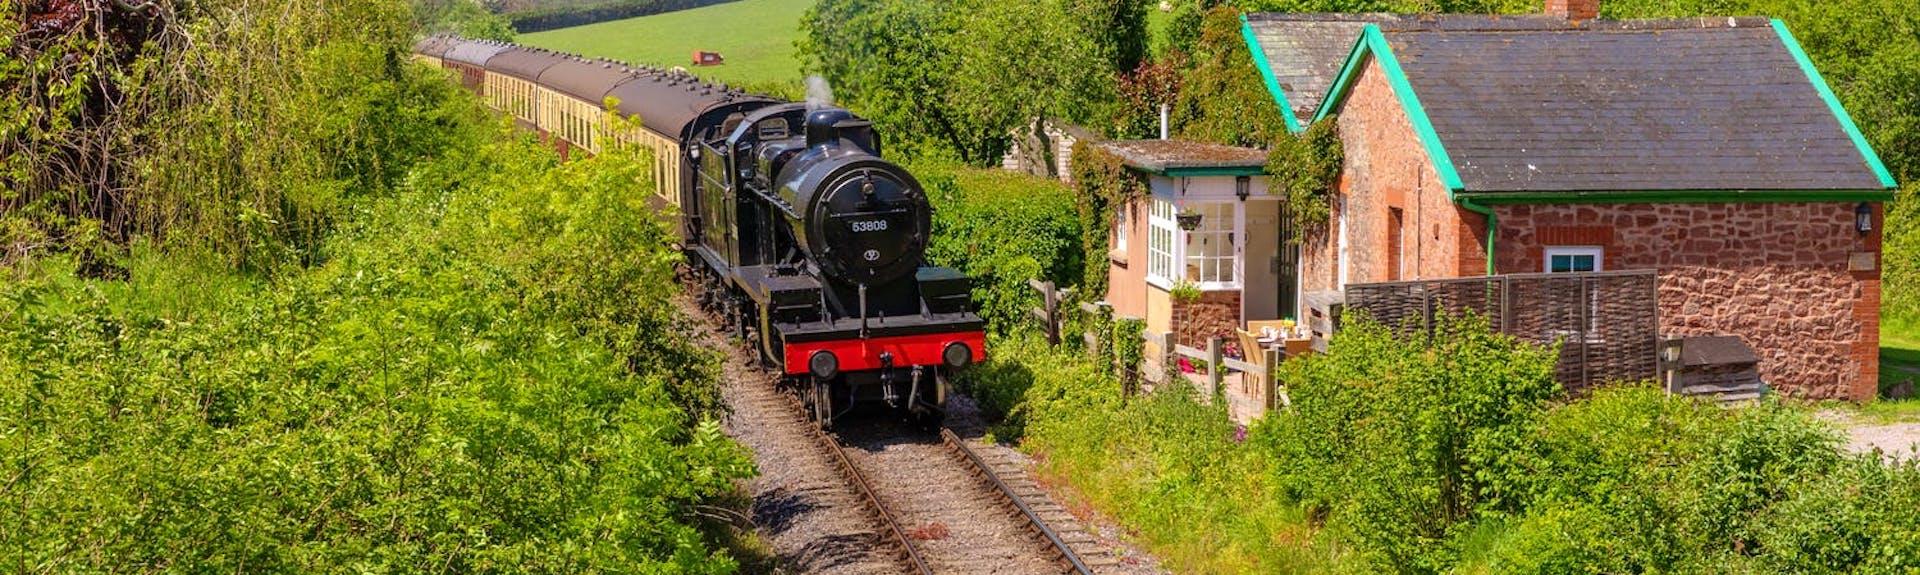 A steam engine glides by a Somerset holiday cottage on a summer's day/